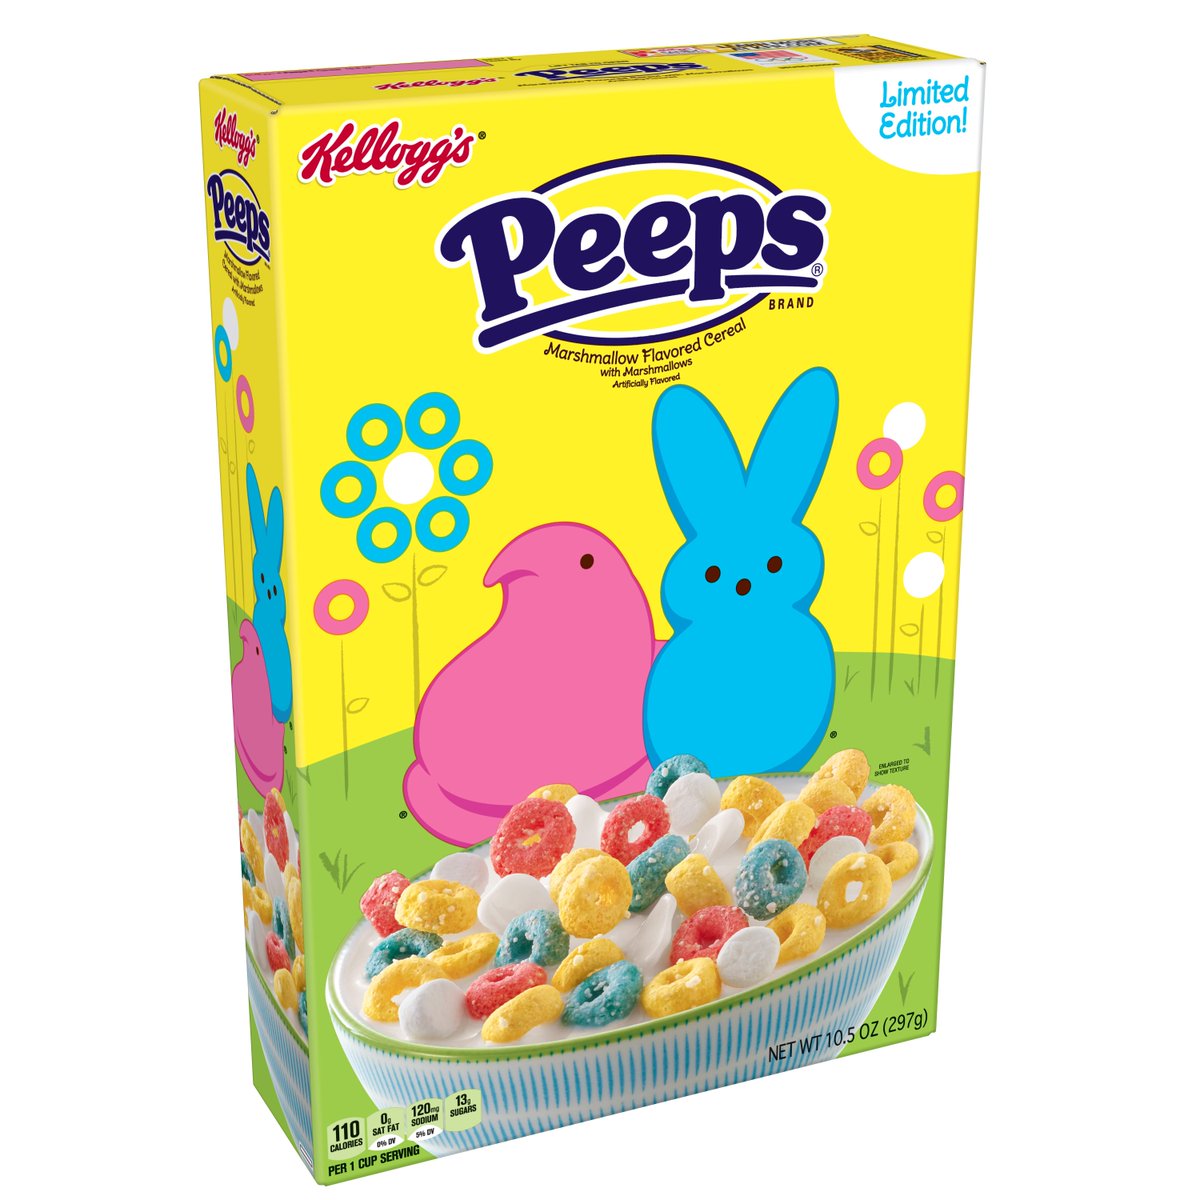 Spring is here and so is Peeps cereal. Available now for a limited time.